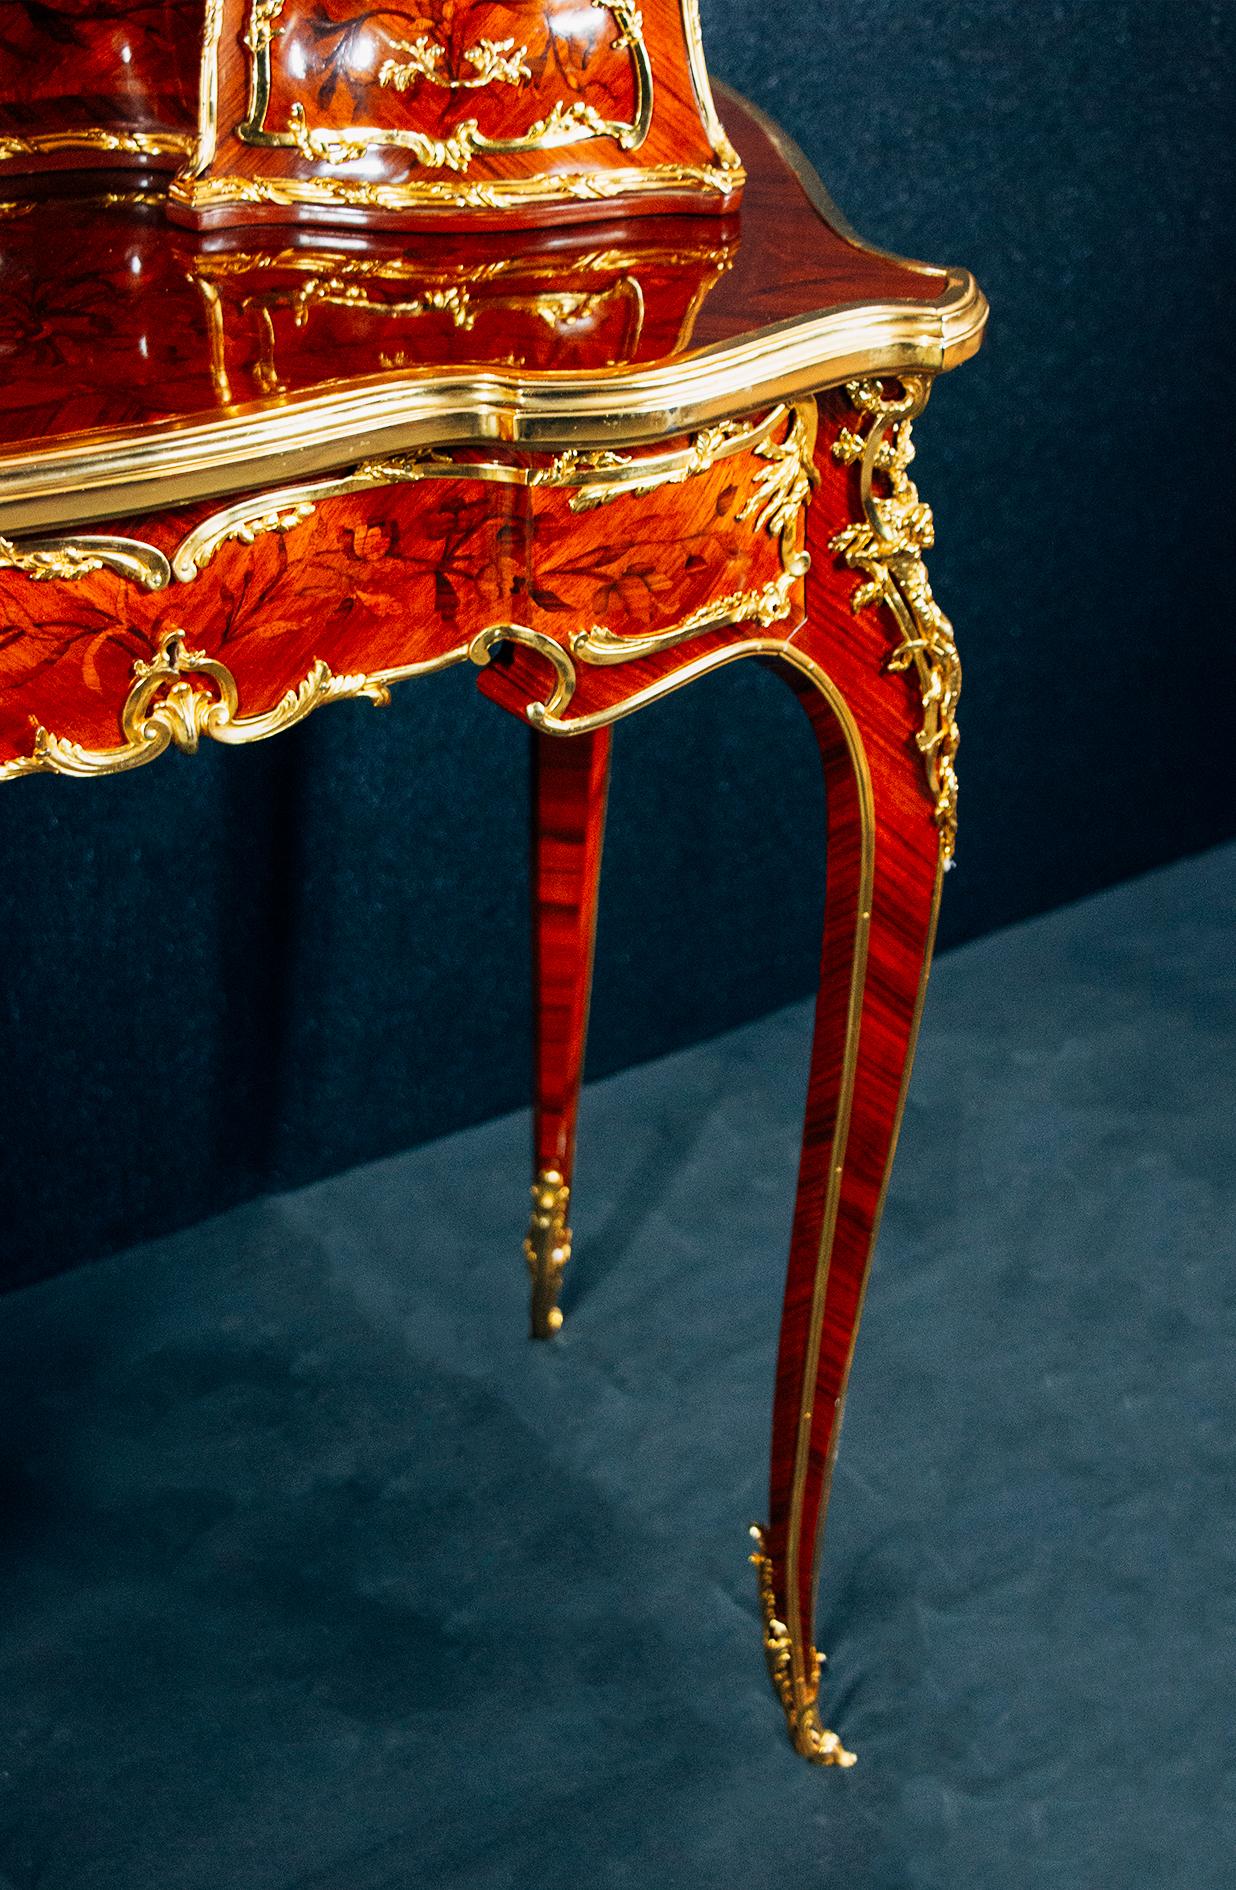  Louis XV Style Ormolu Mounted Kingwood In Excellent Condition For Sale In Paris, Sanit - Ouen